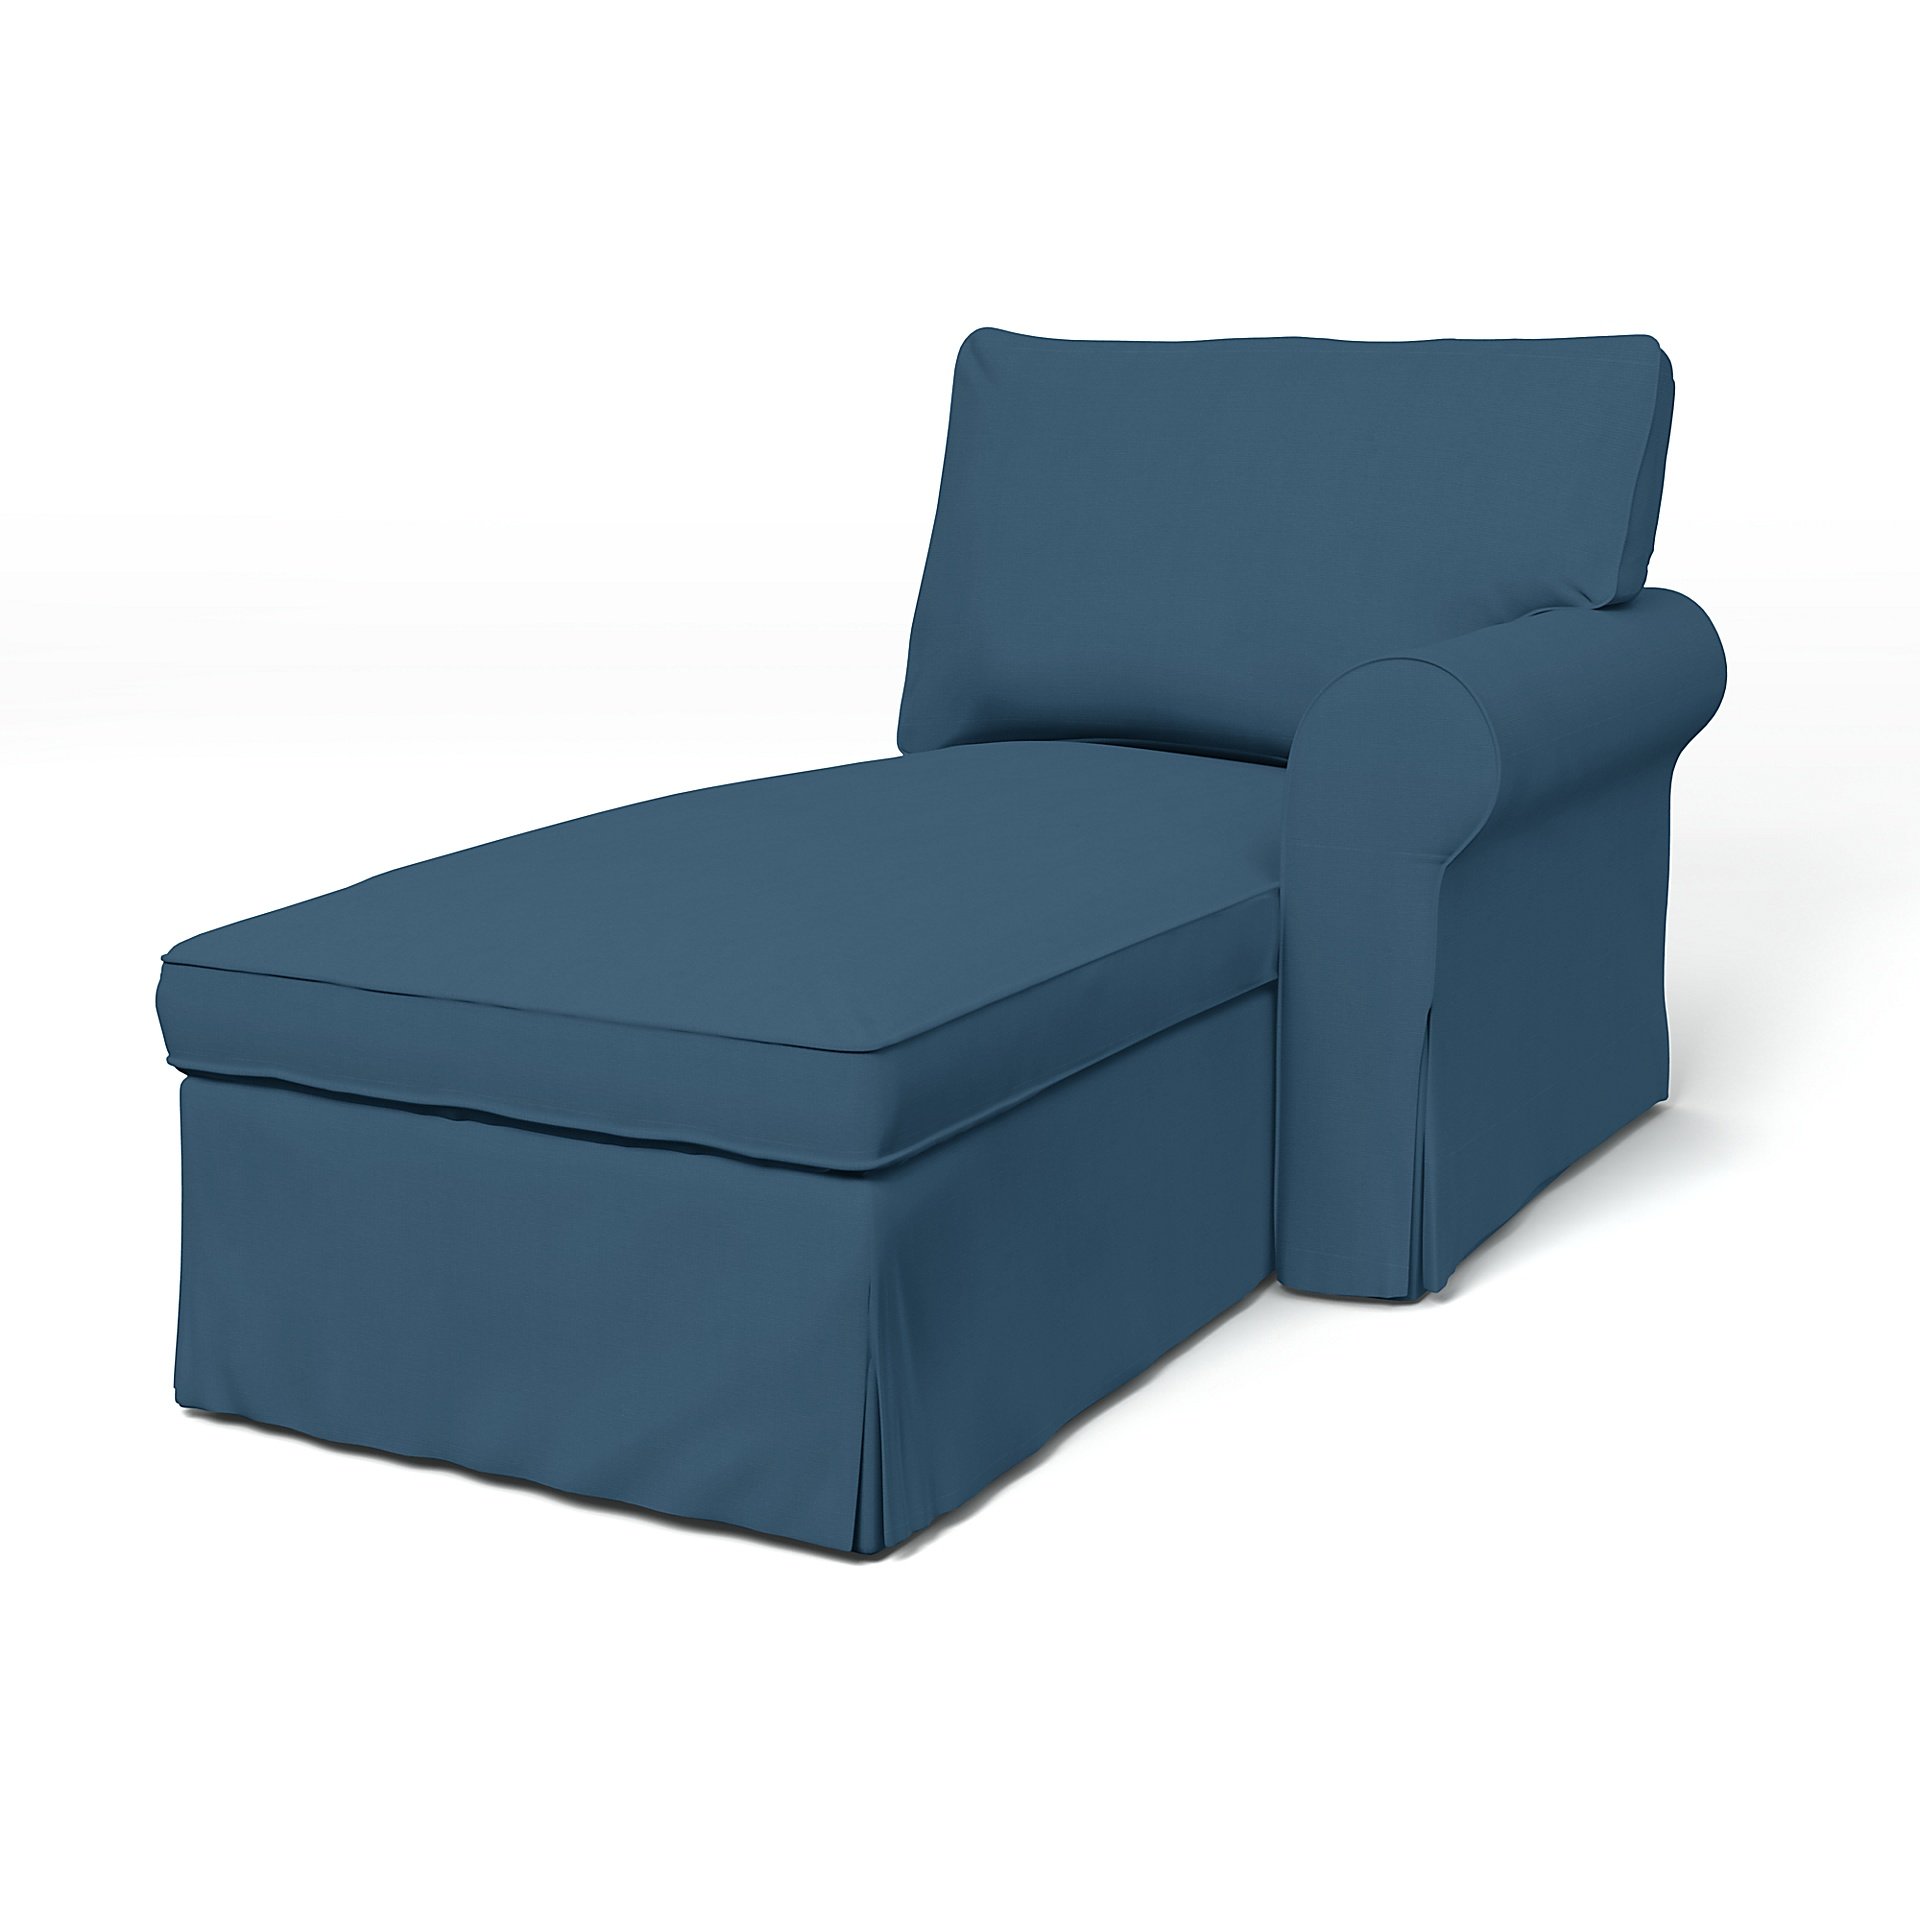 IKEA - Ektorp Chaise with Right Armrest Cover, Real Teal, Cotton - Bemz